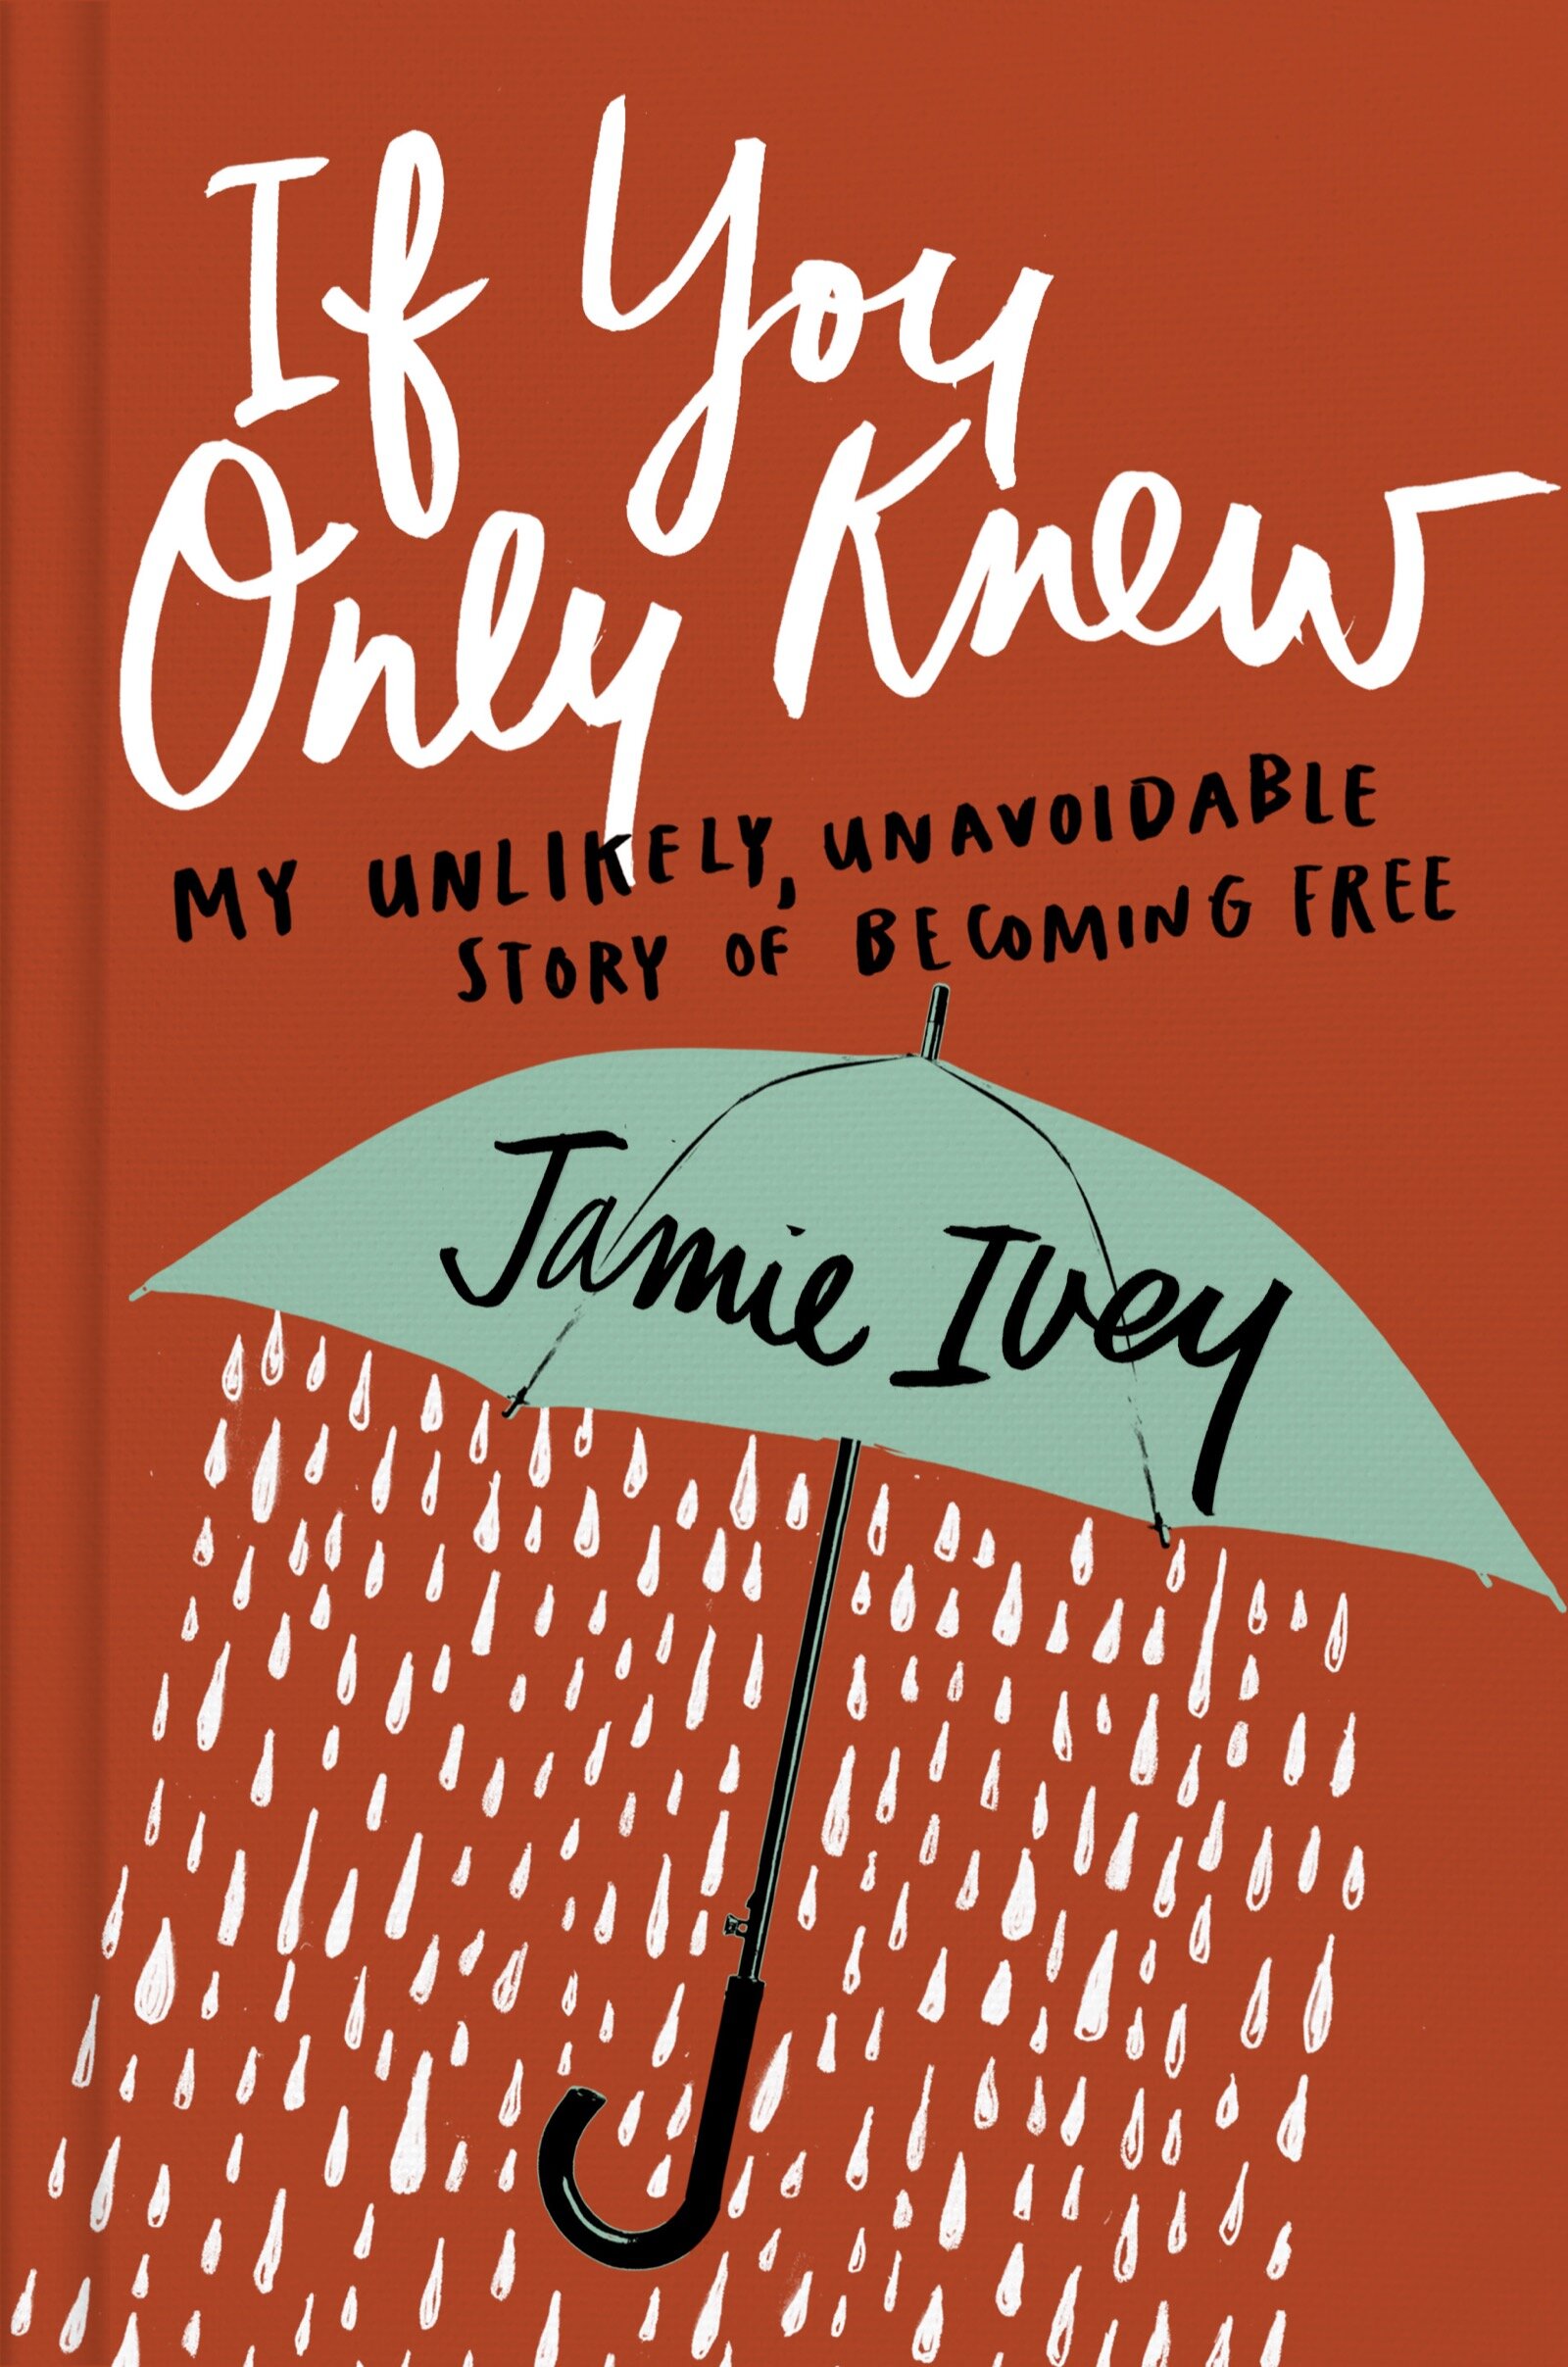 If You Only Knew: My Unlikely, Unavoidable Story of Becoming Free